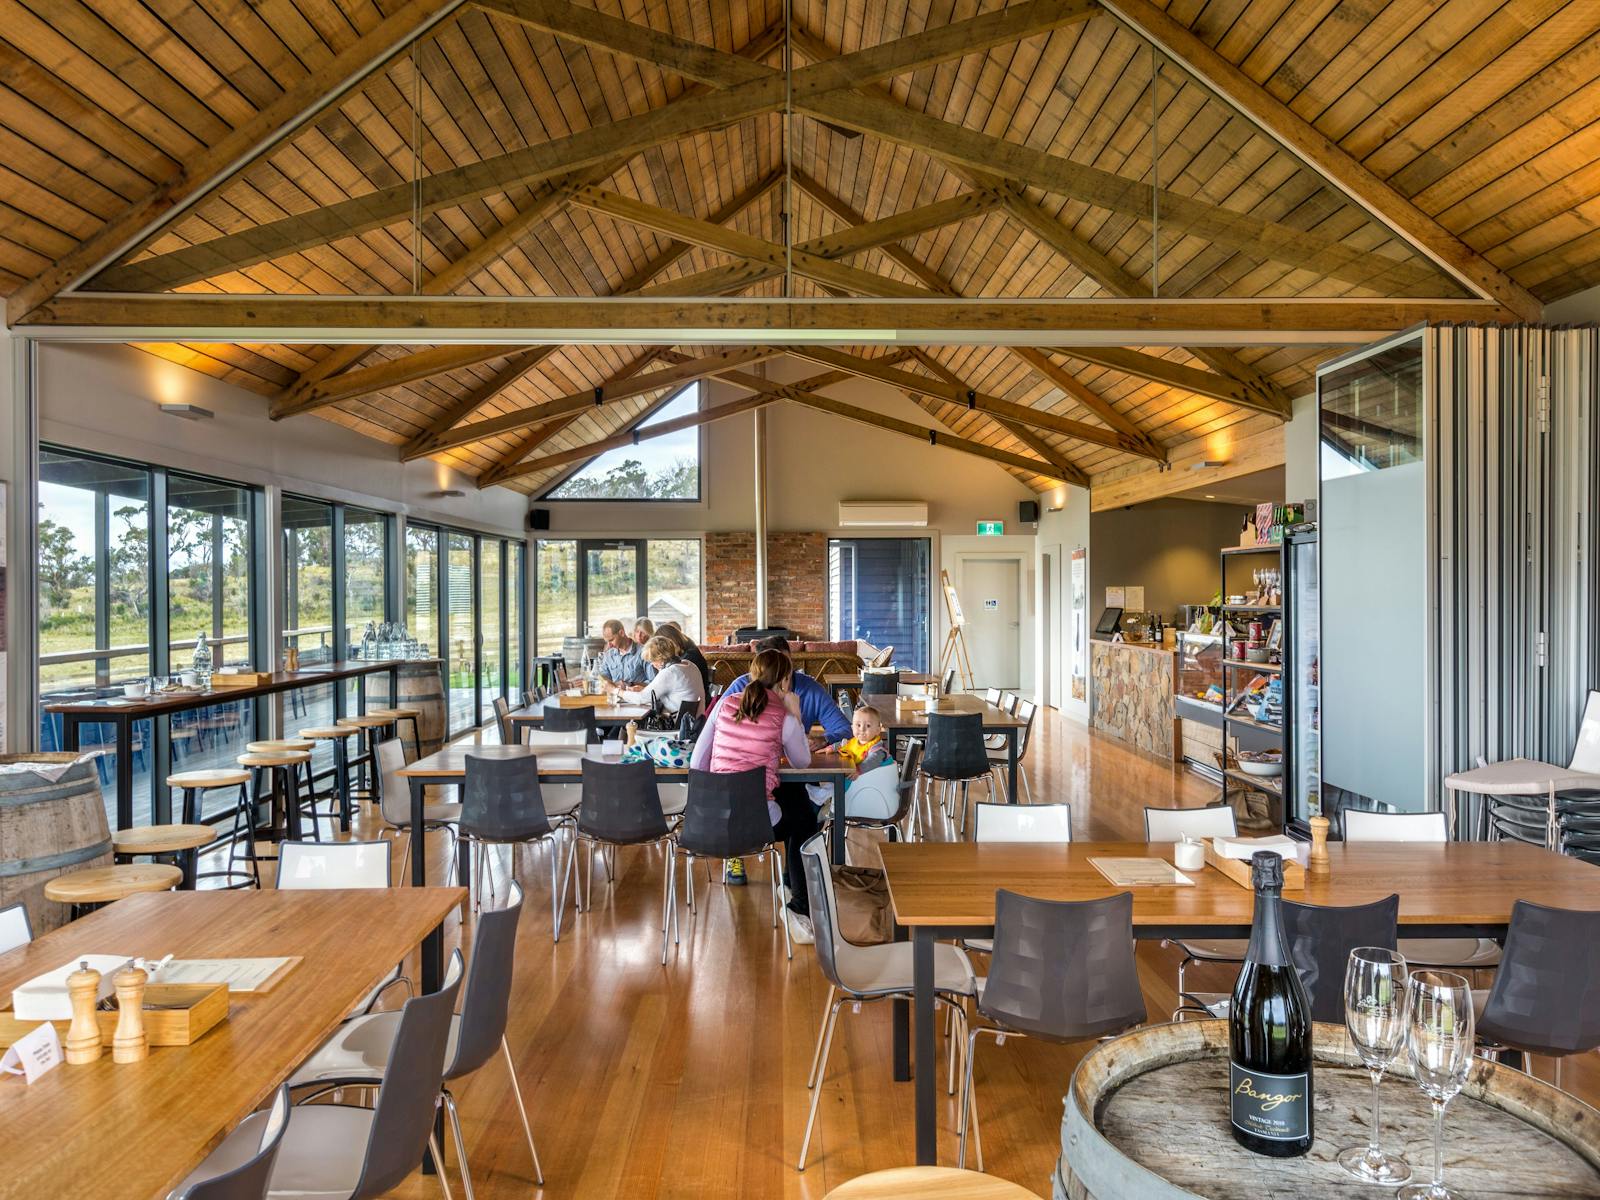 Stunning architecturally designed building made from beautiful Tasmanian timbers.